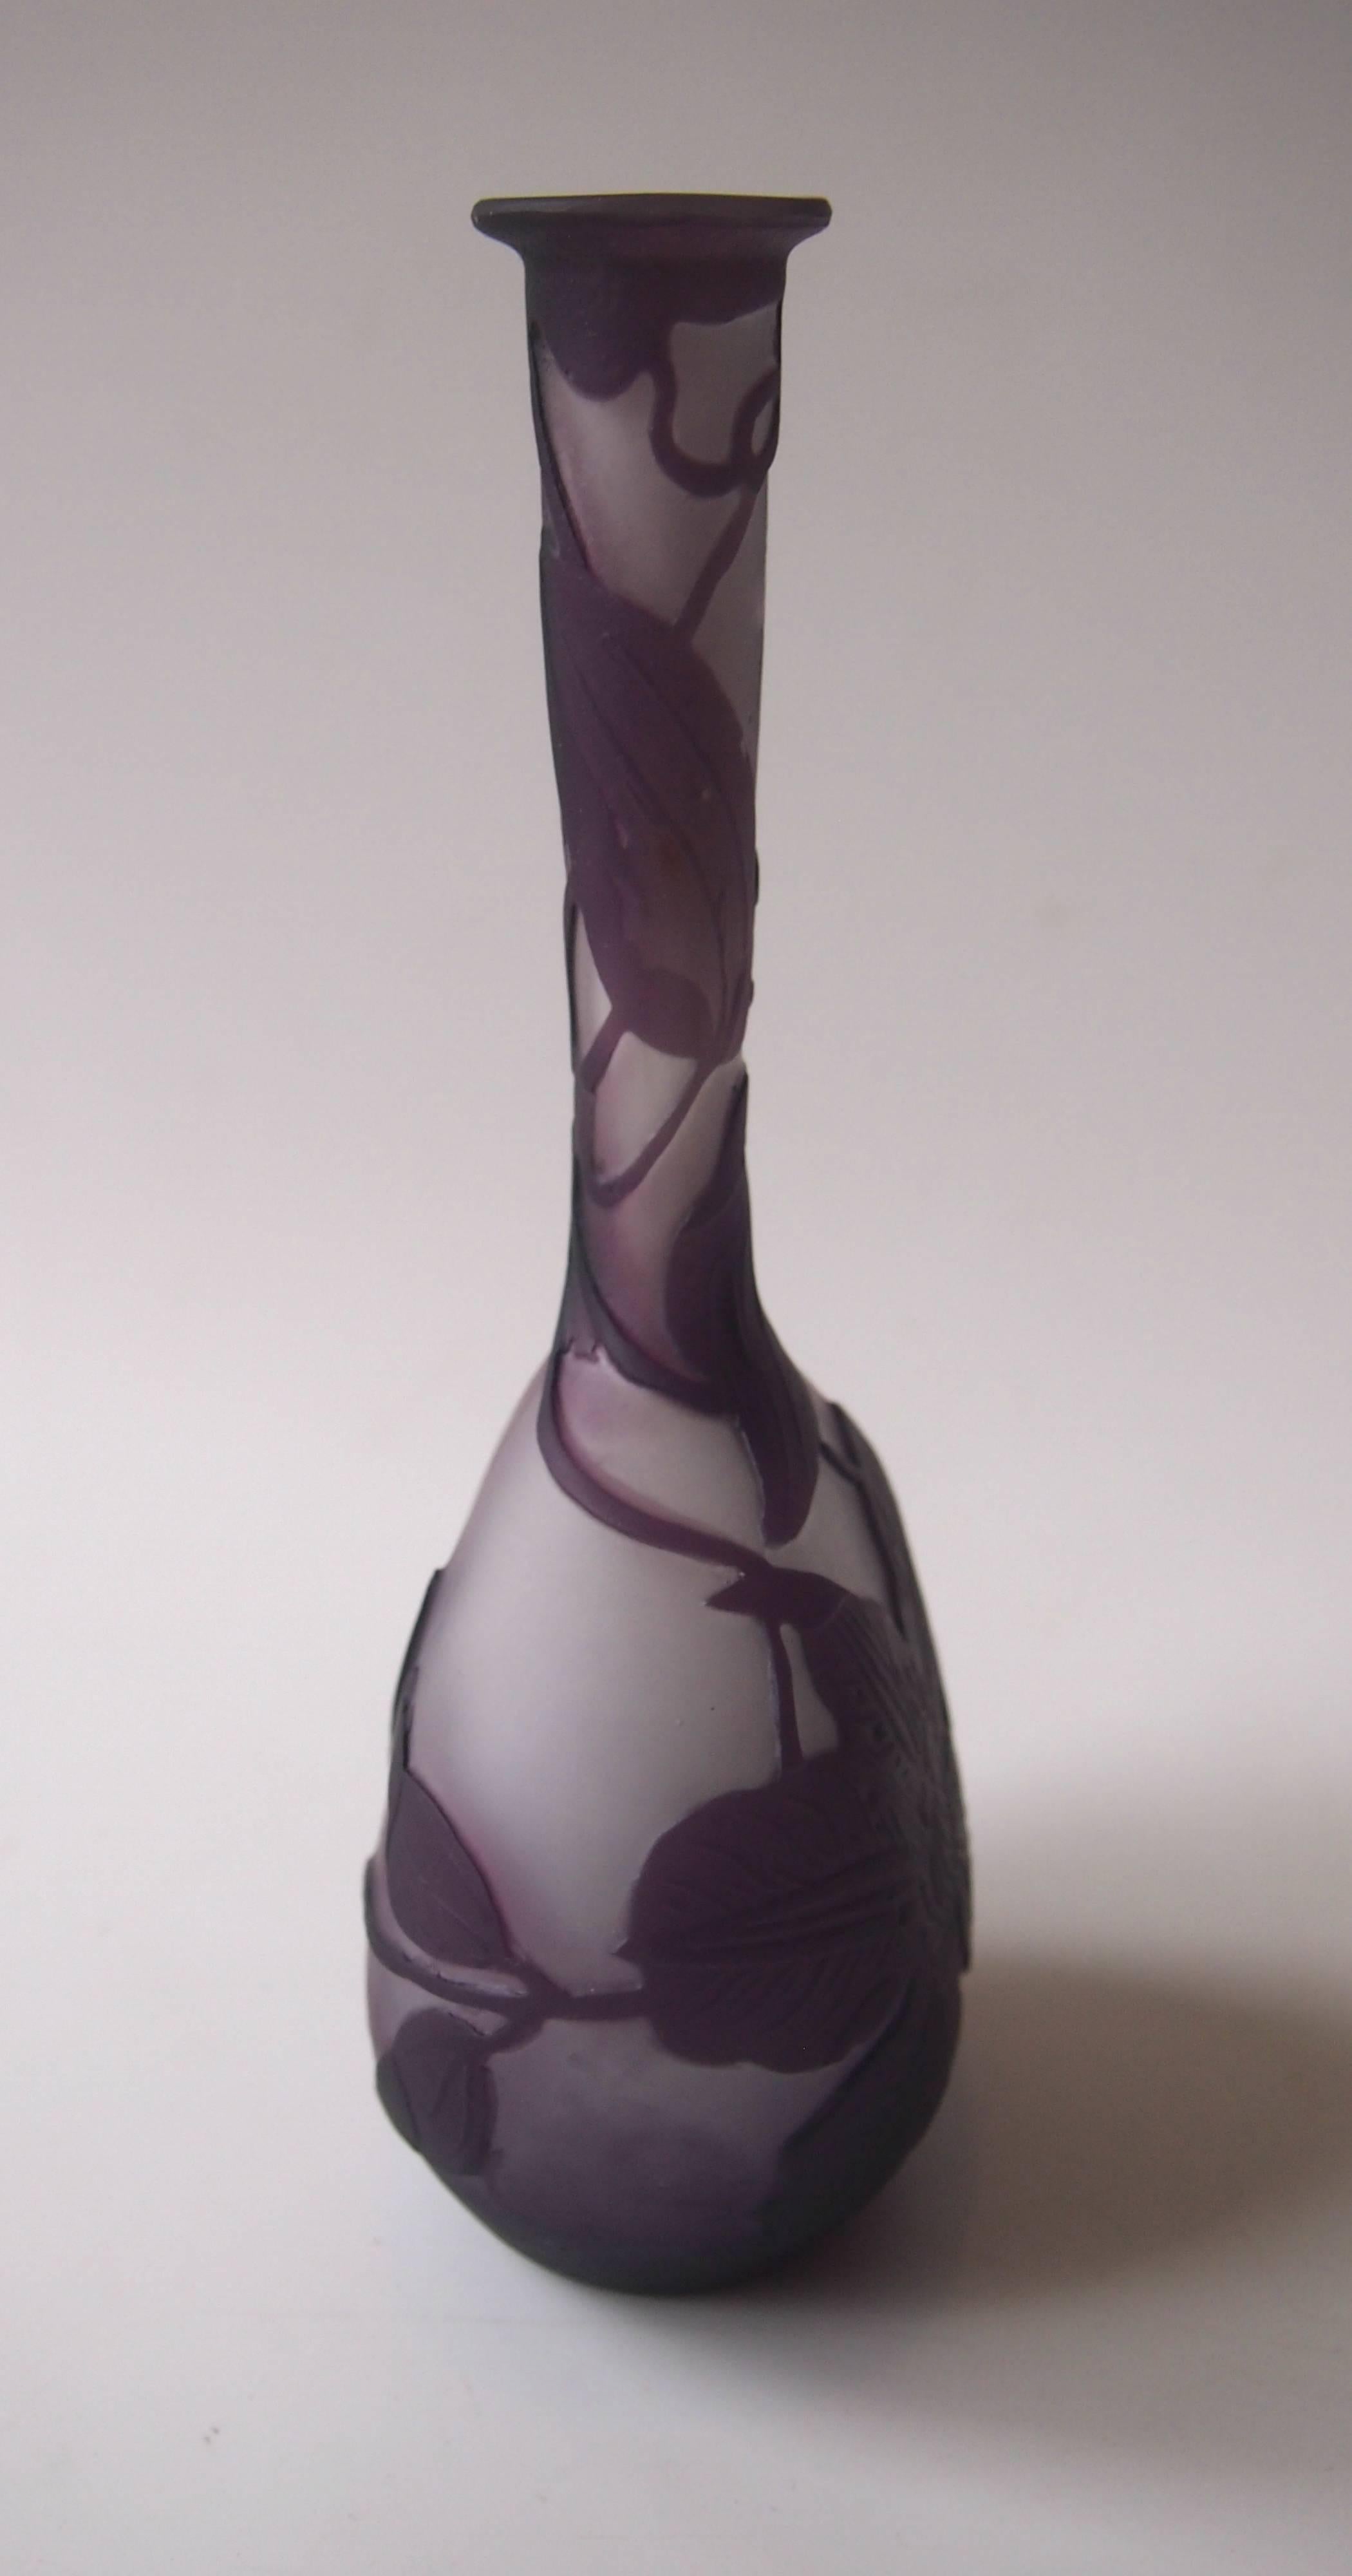 Classic Art Nouveau Emile Galle 'Banjo' vase, depicting trailing clematis blooms in purple over frosted clear, signed in cameo (see picture 4). Emile Galle Cameo Banjo vases (so called because they vaguely resemble that shape) are amongst the most